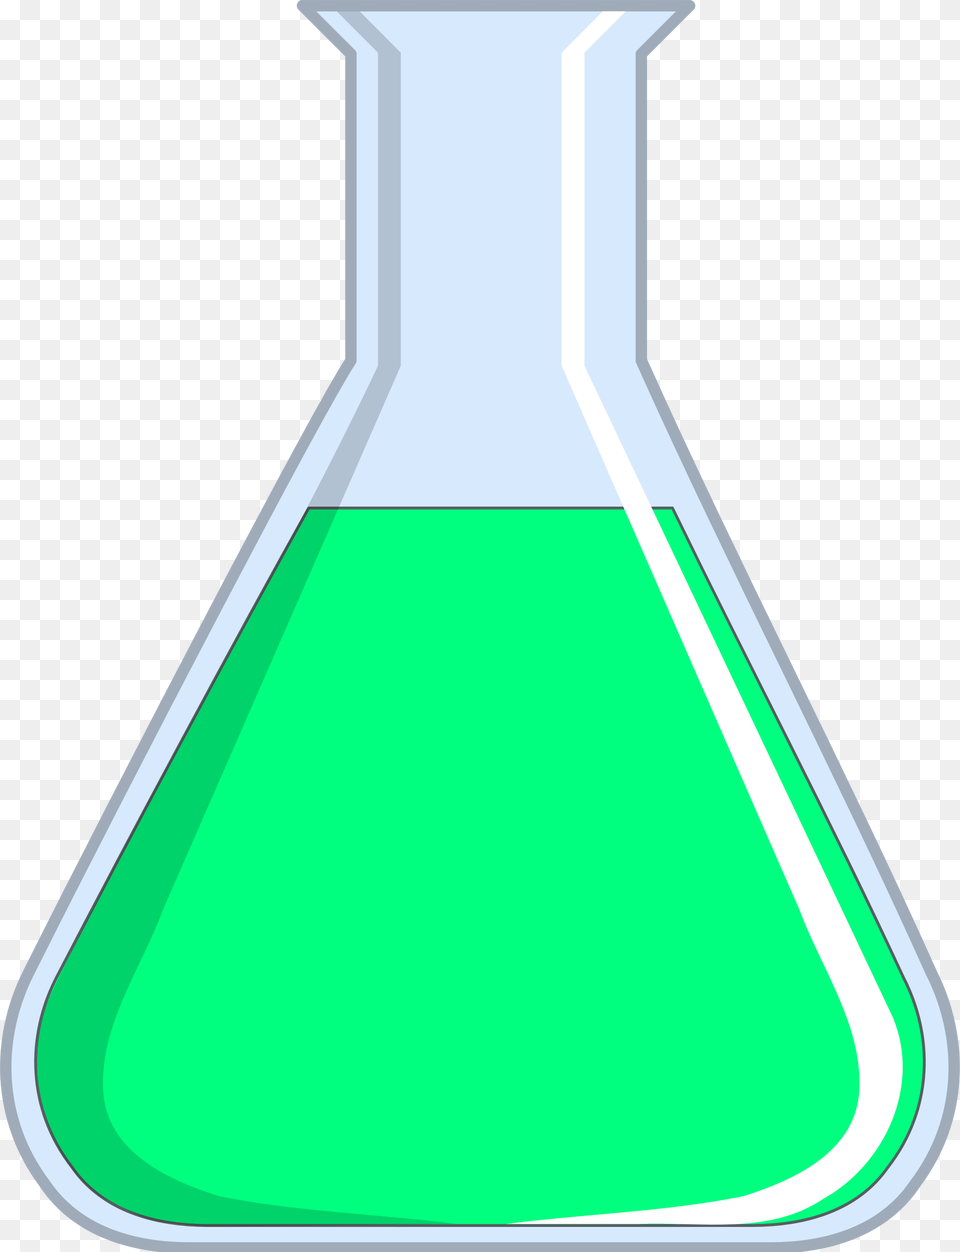 Clipart, Jar, Cone Png Image